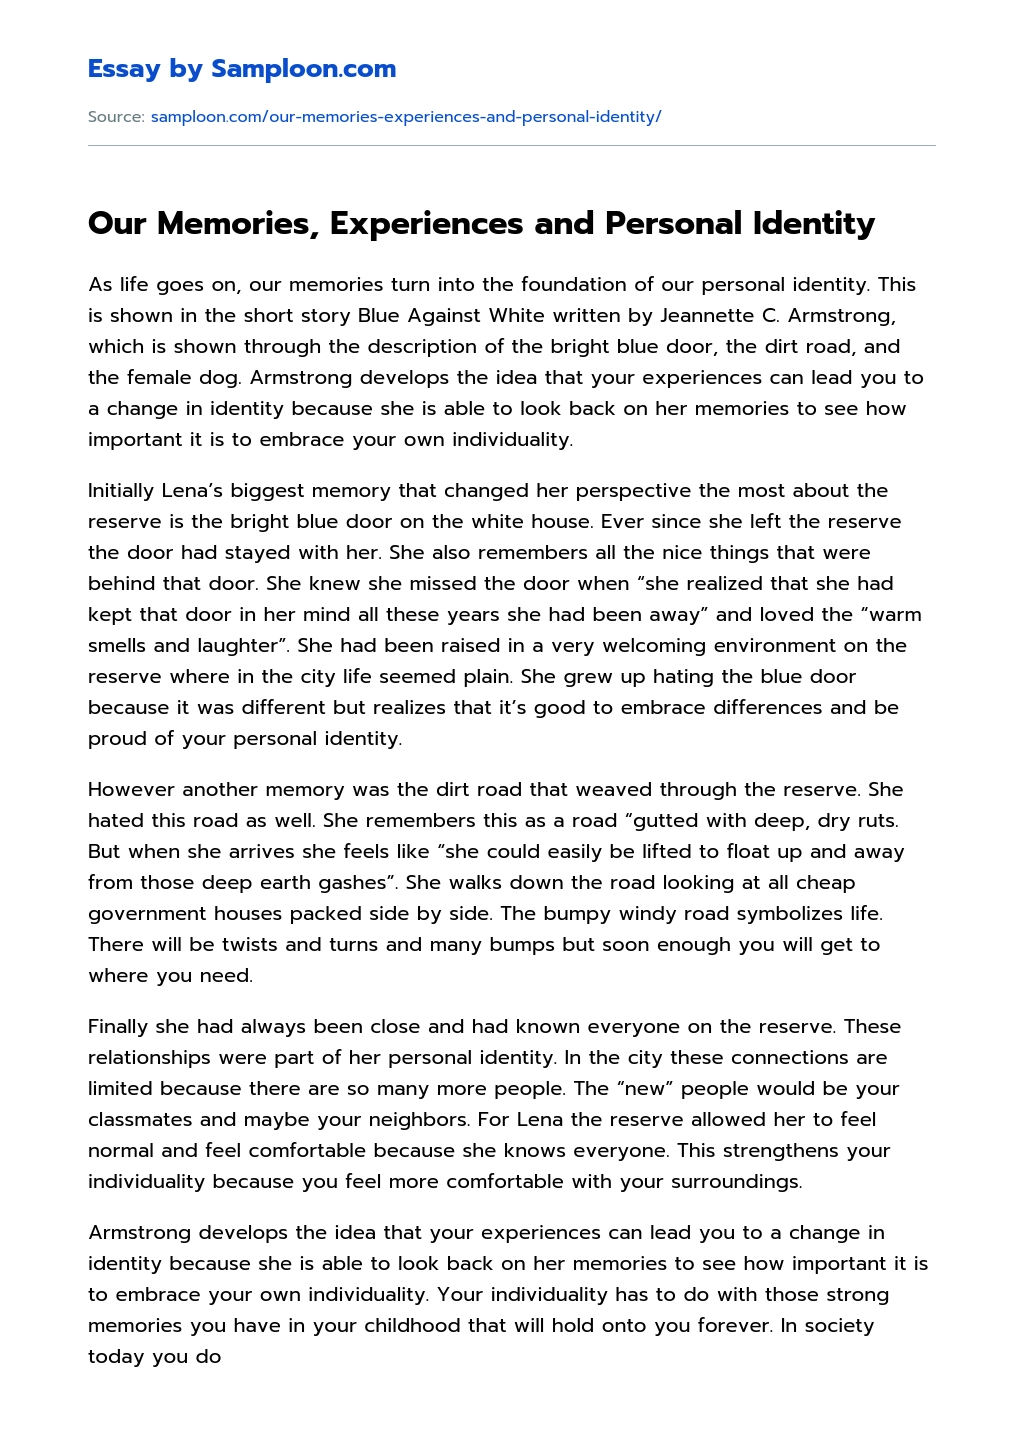 Our Memories, Experiences and Personal Identity essay